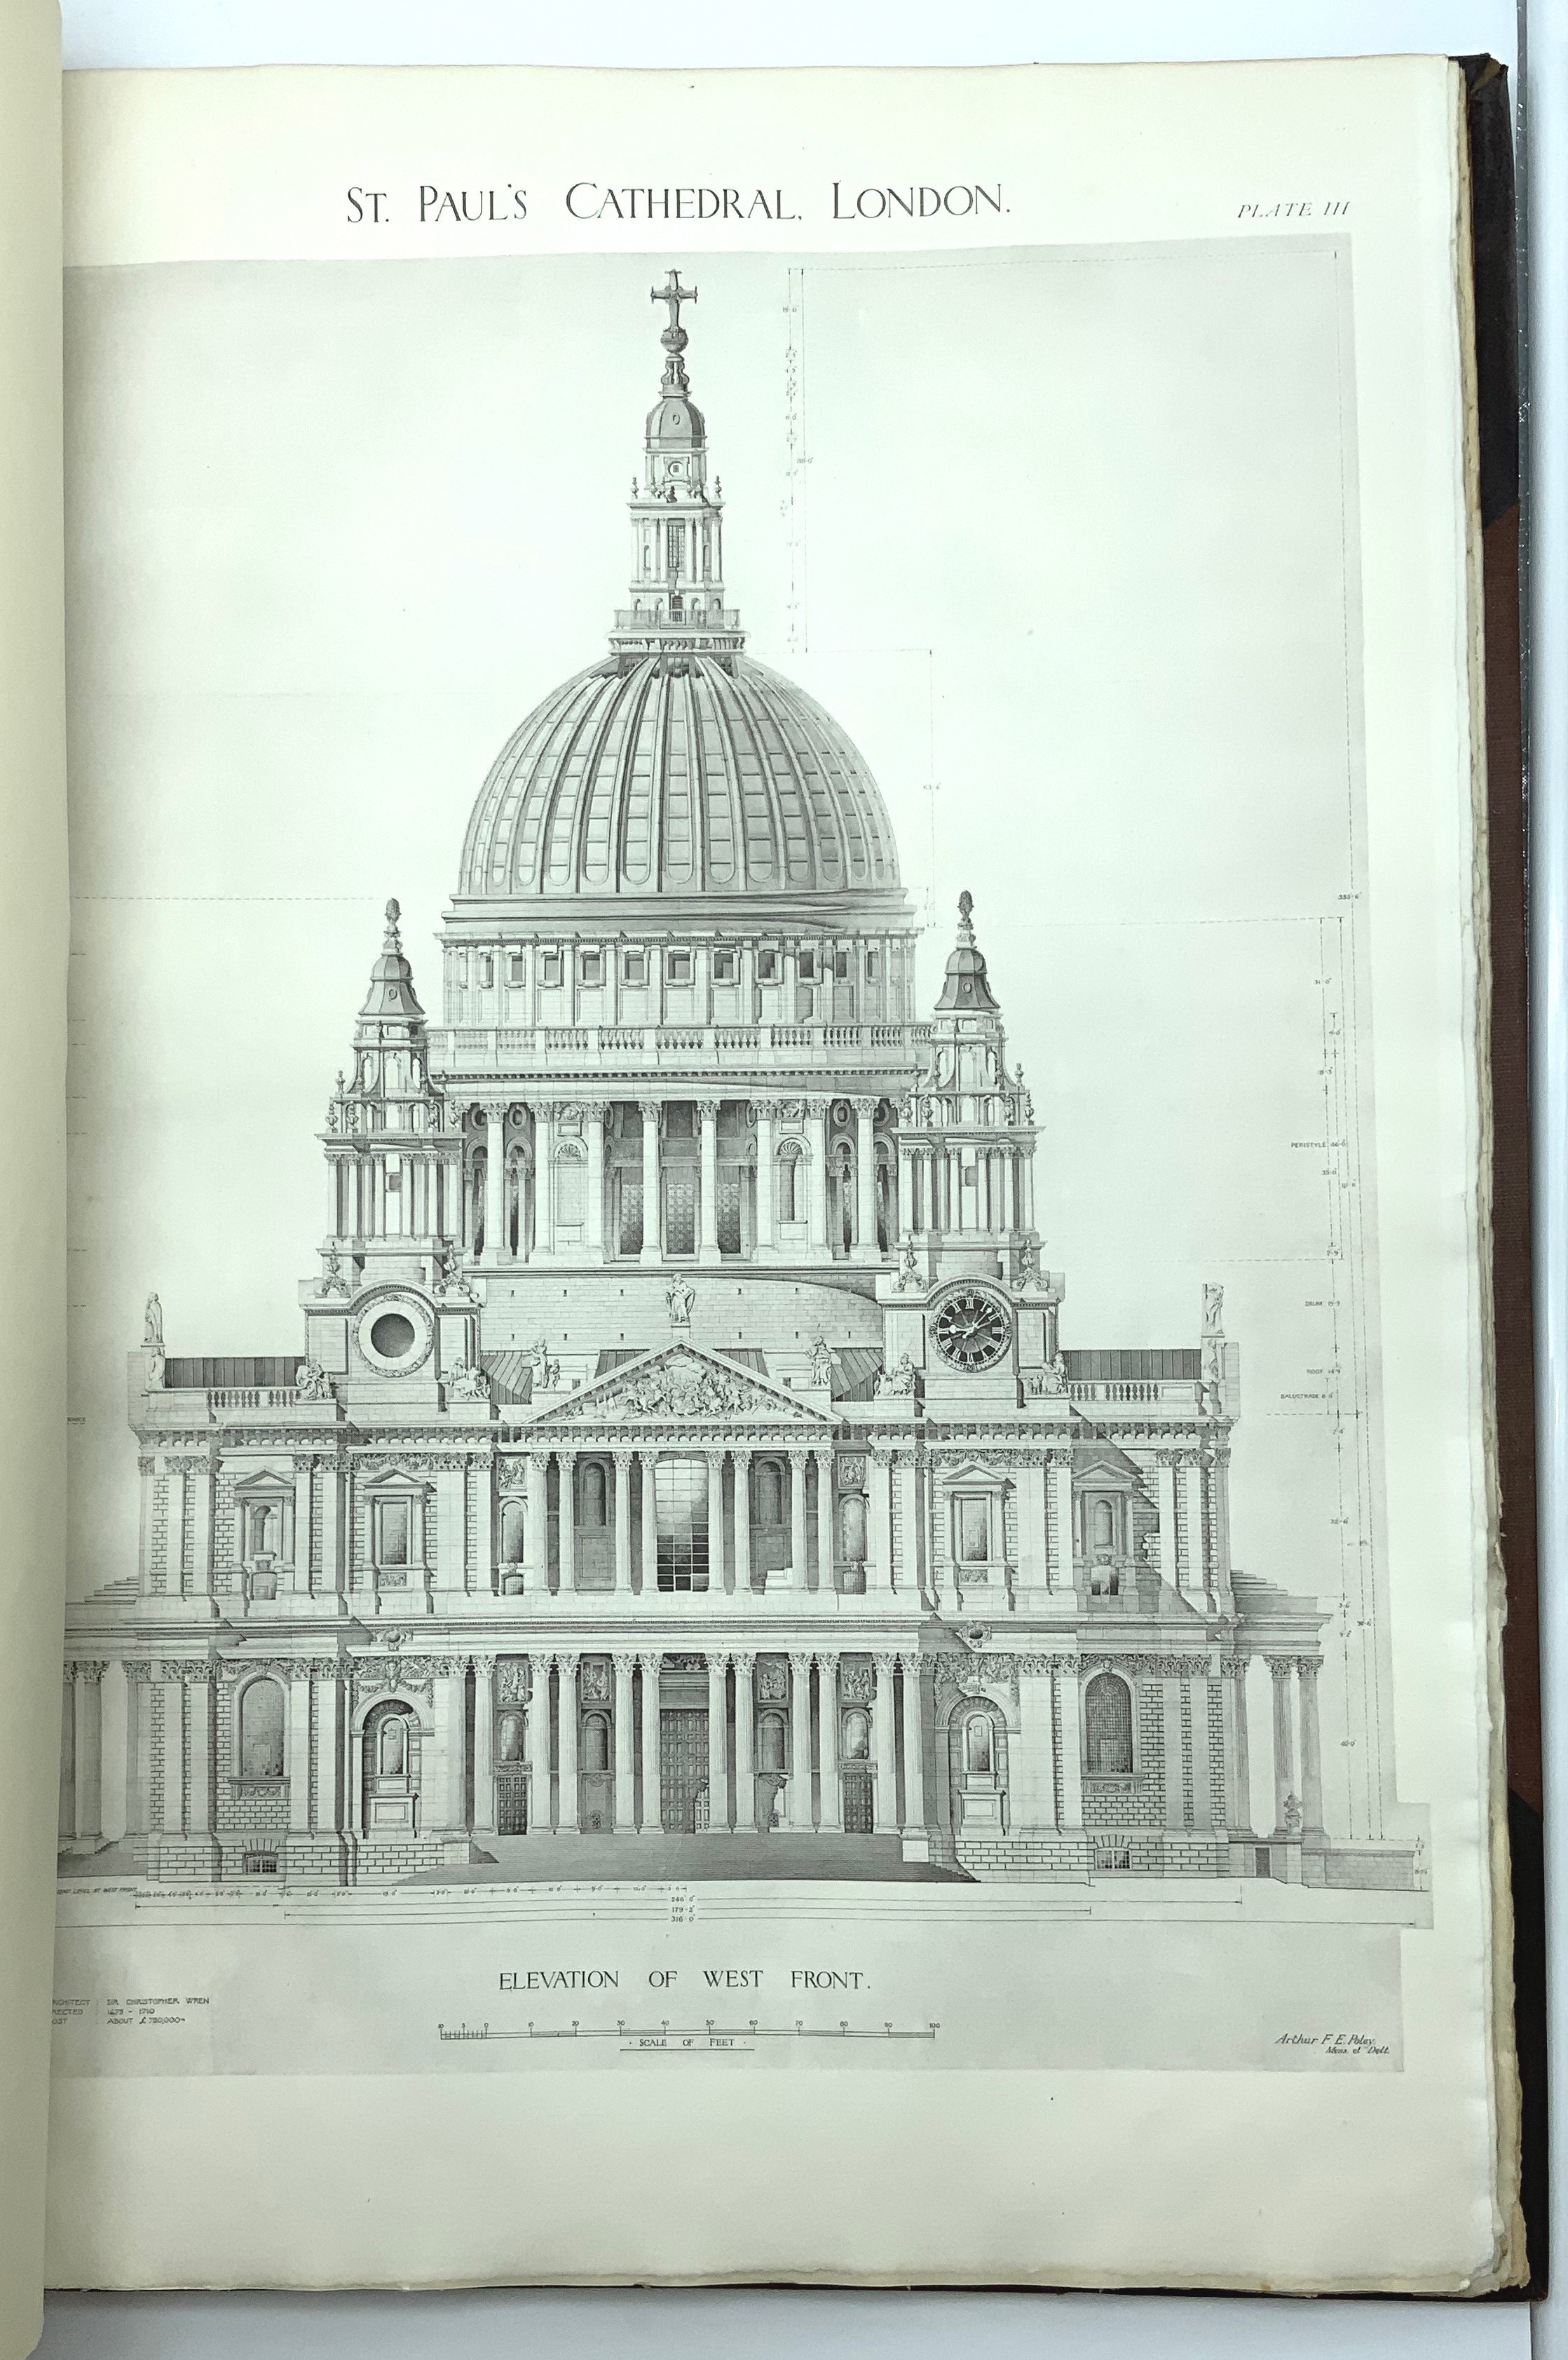 ST. PAUL'S CATHEDRAL, LONDON, MEASURED, DRAWN & DESCRIBED BY ARTHUR F. E. POLEY 1932 - Image 7 of 8